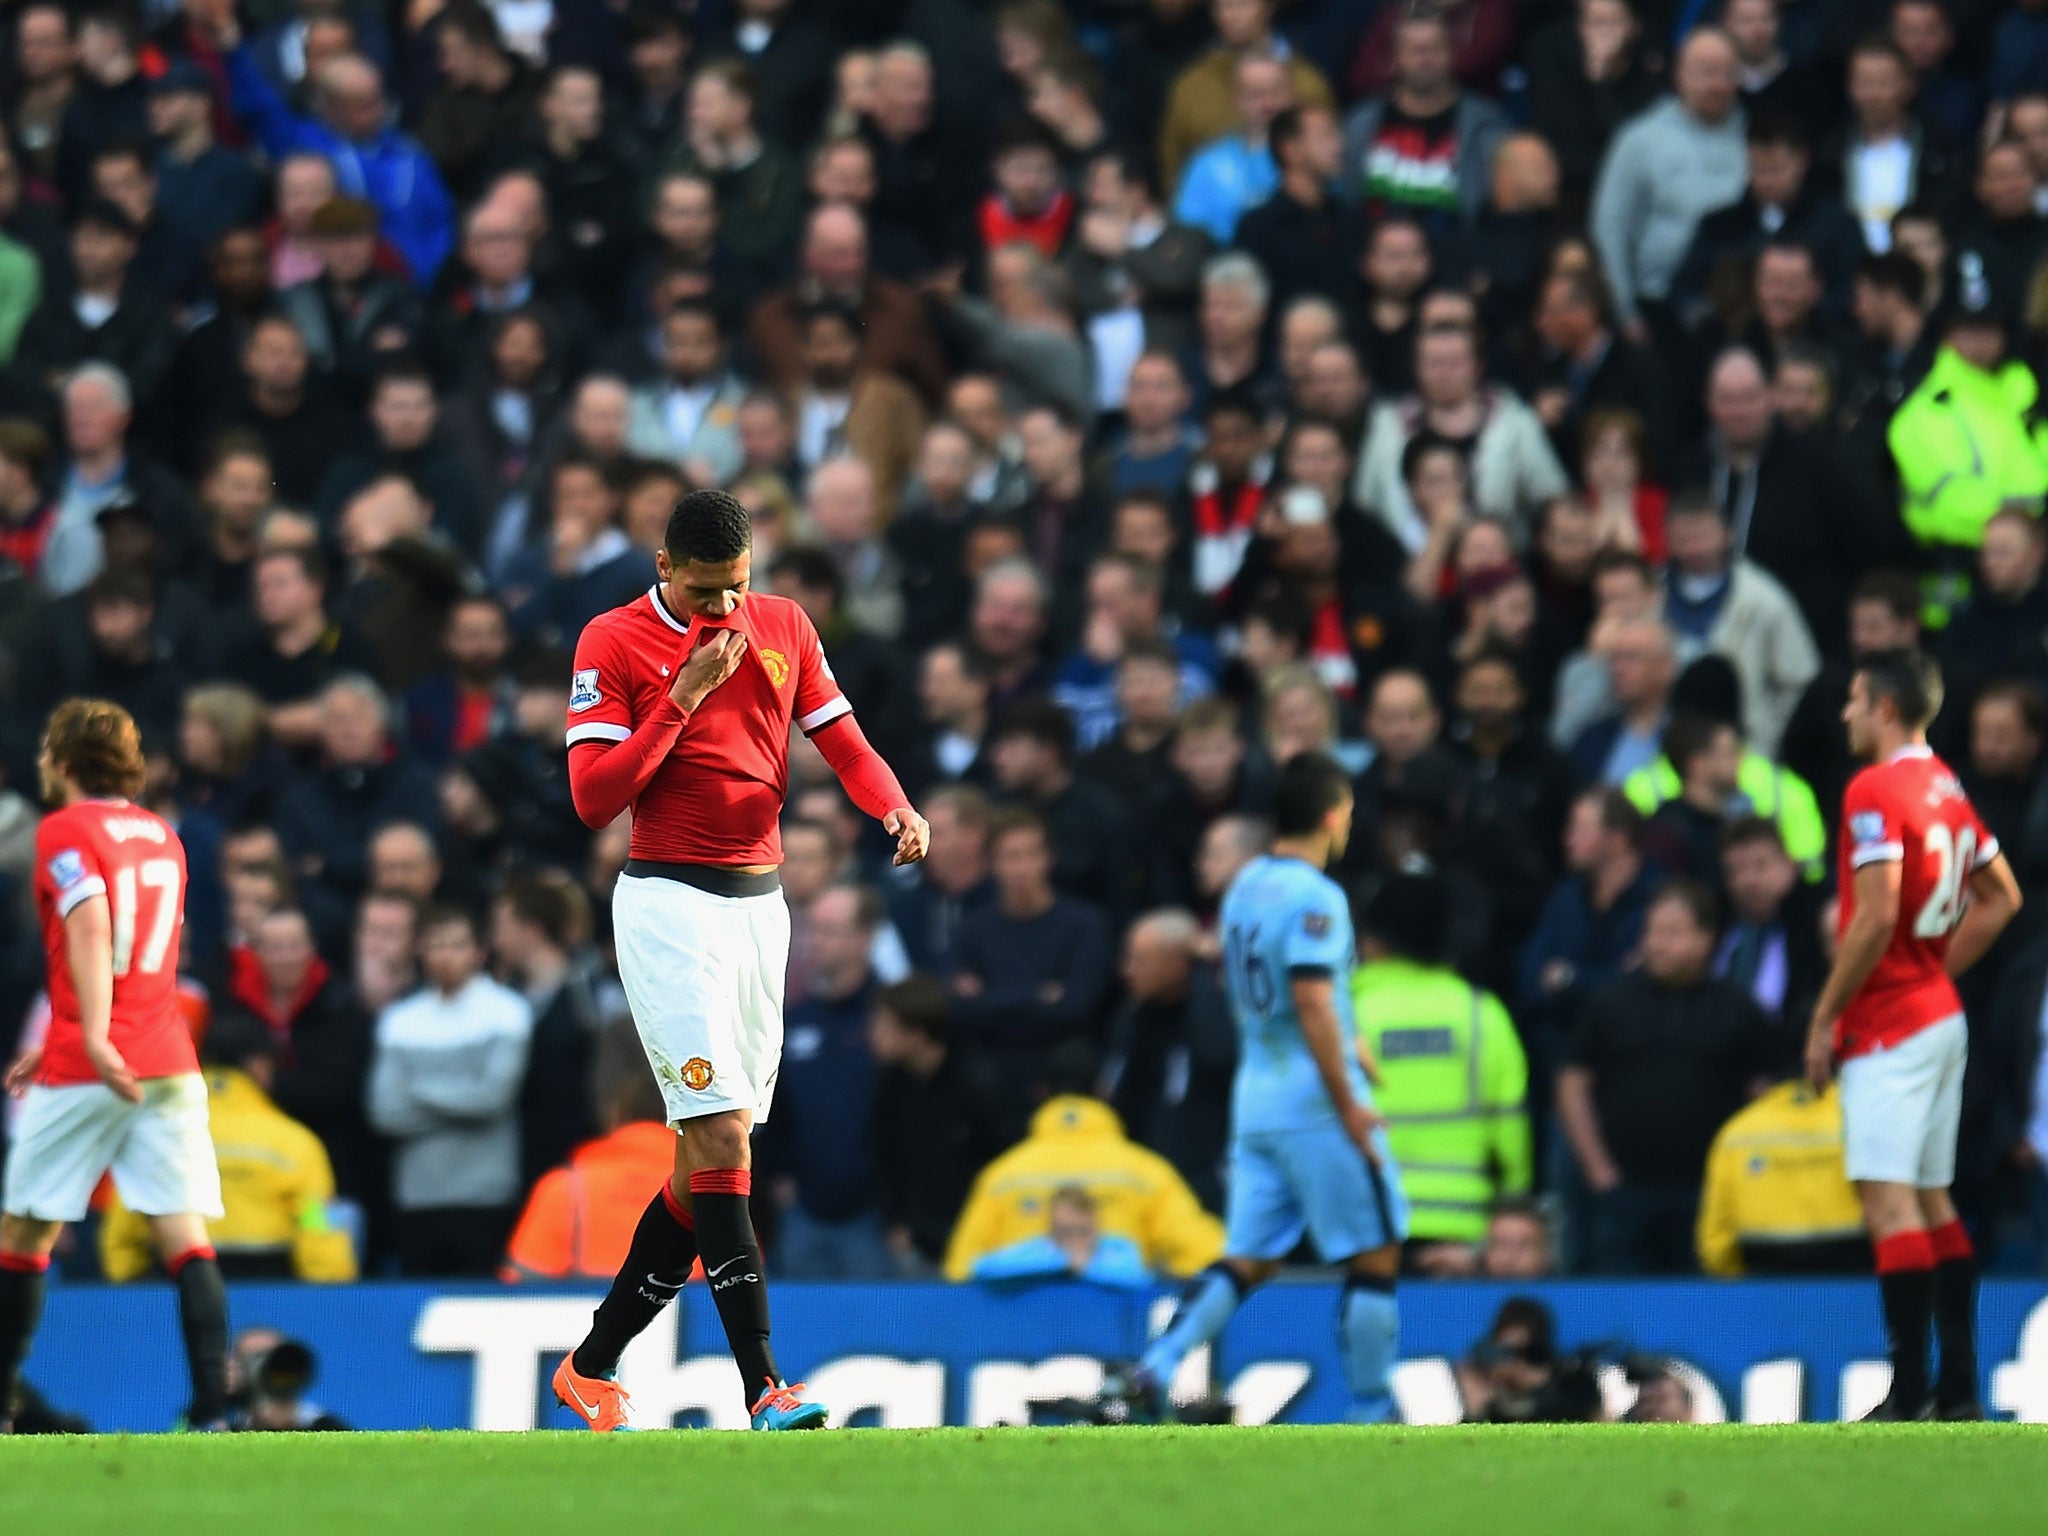 Chris Smalling walks off the pitch after being sent-off during the Manchester derby defeat to Manchester City